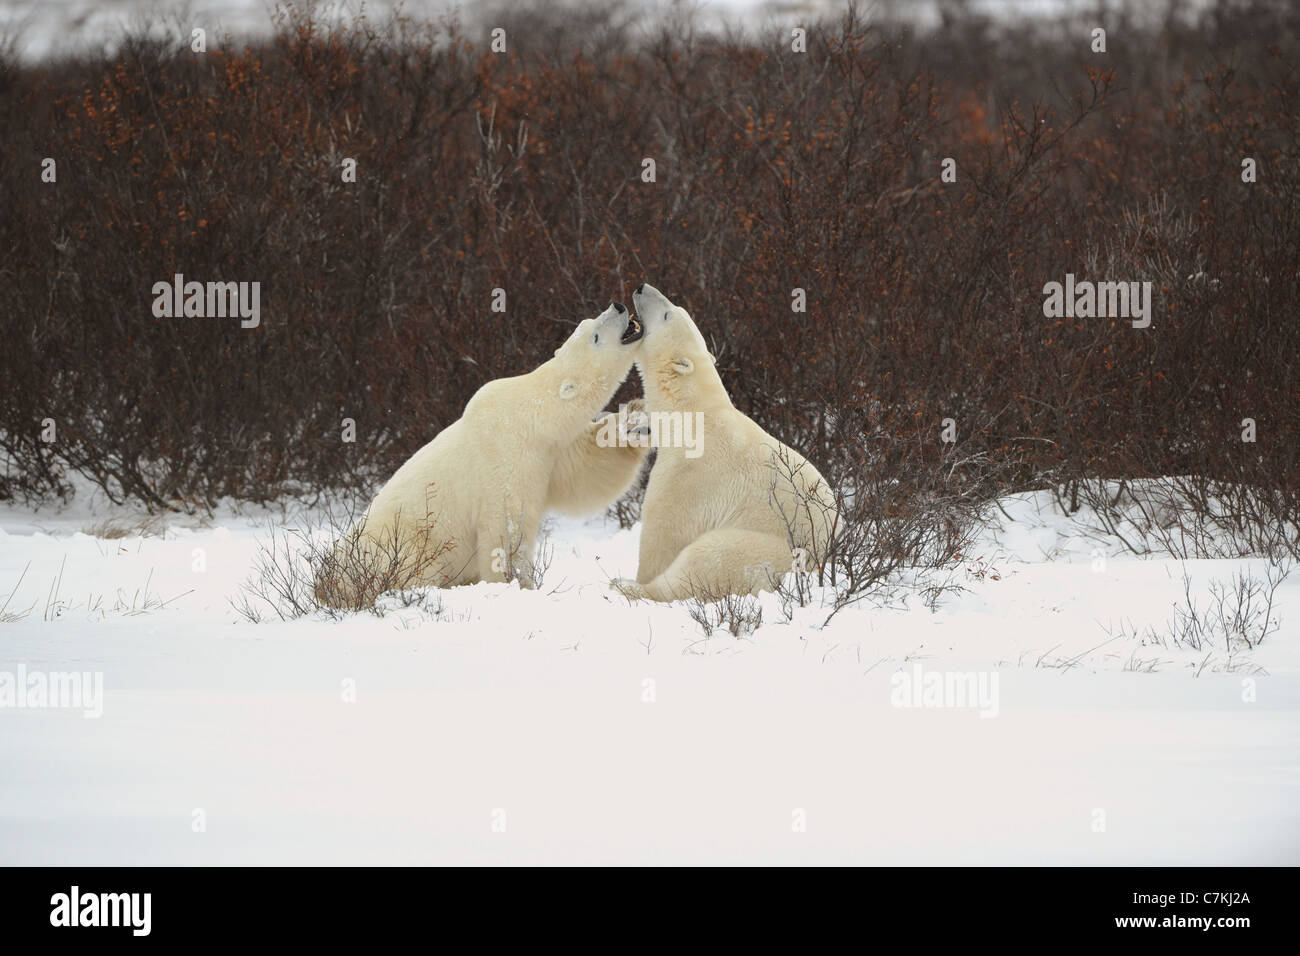 Dialogue of polar bears. Two polar bears have met against a dark bush and are measured by mouths. Stock Photo